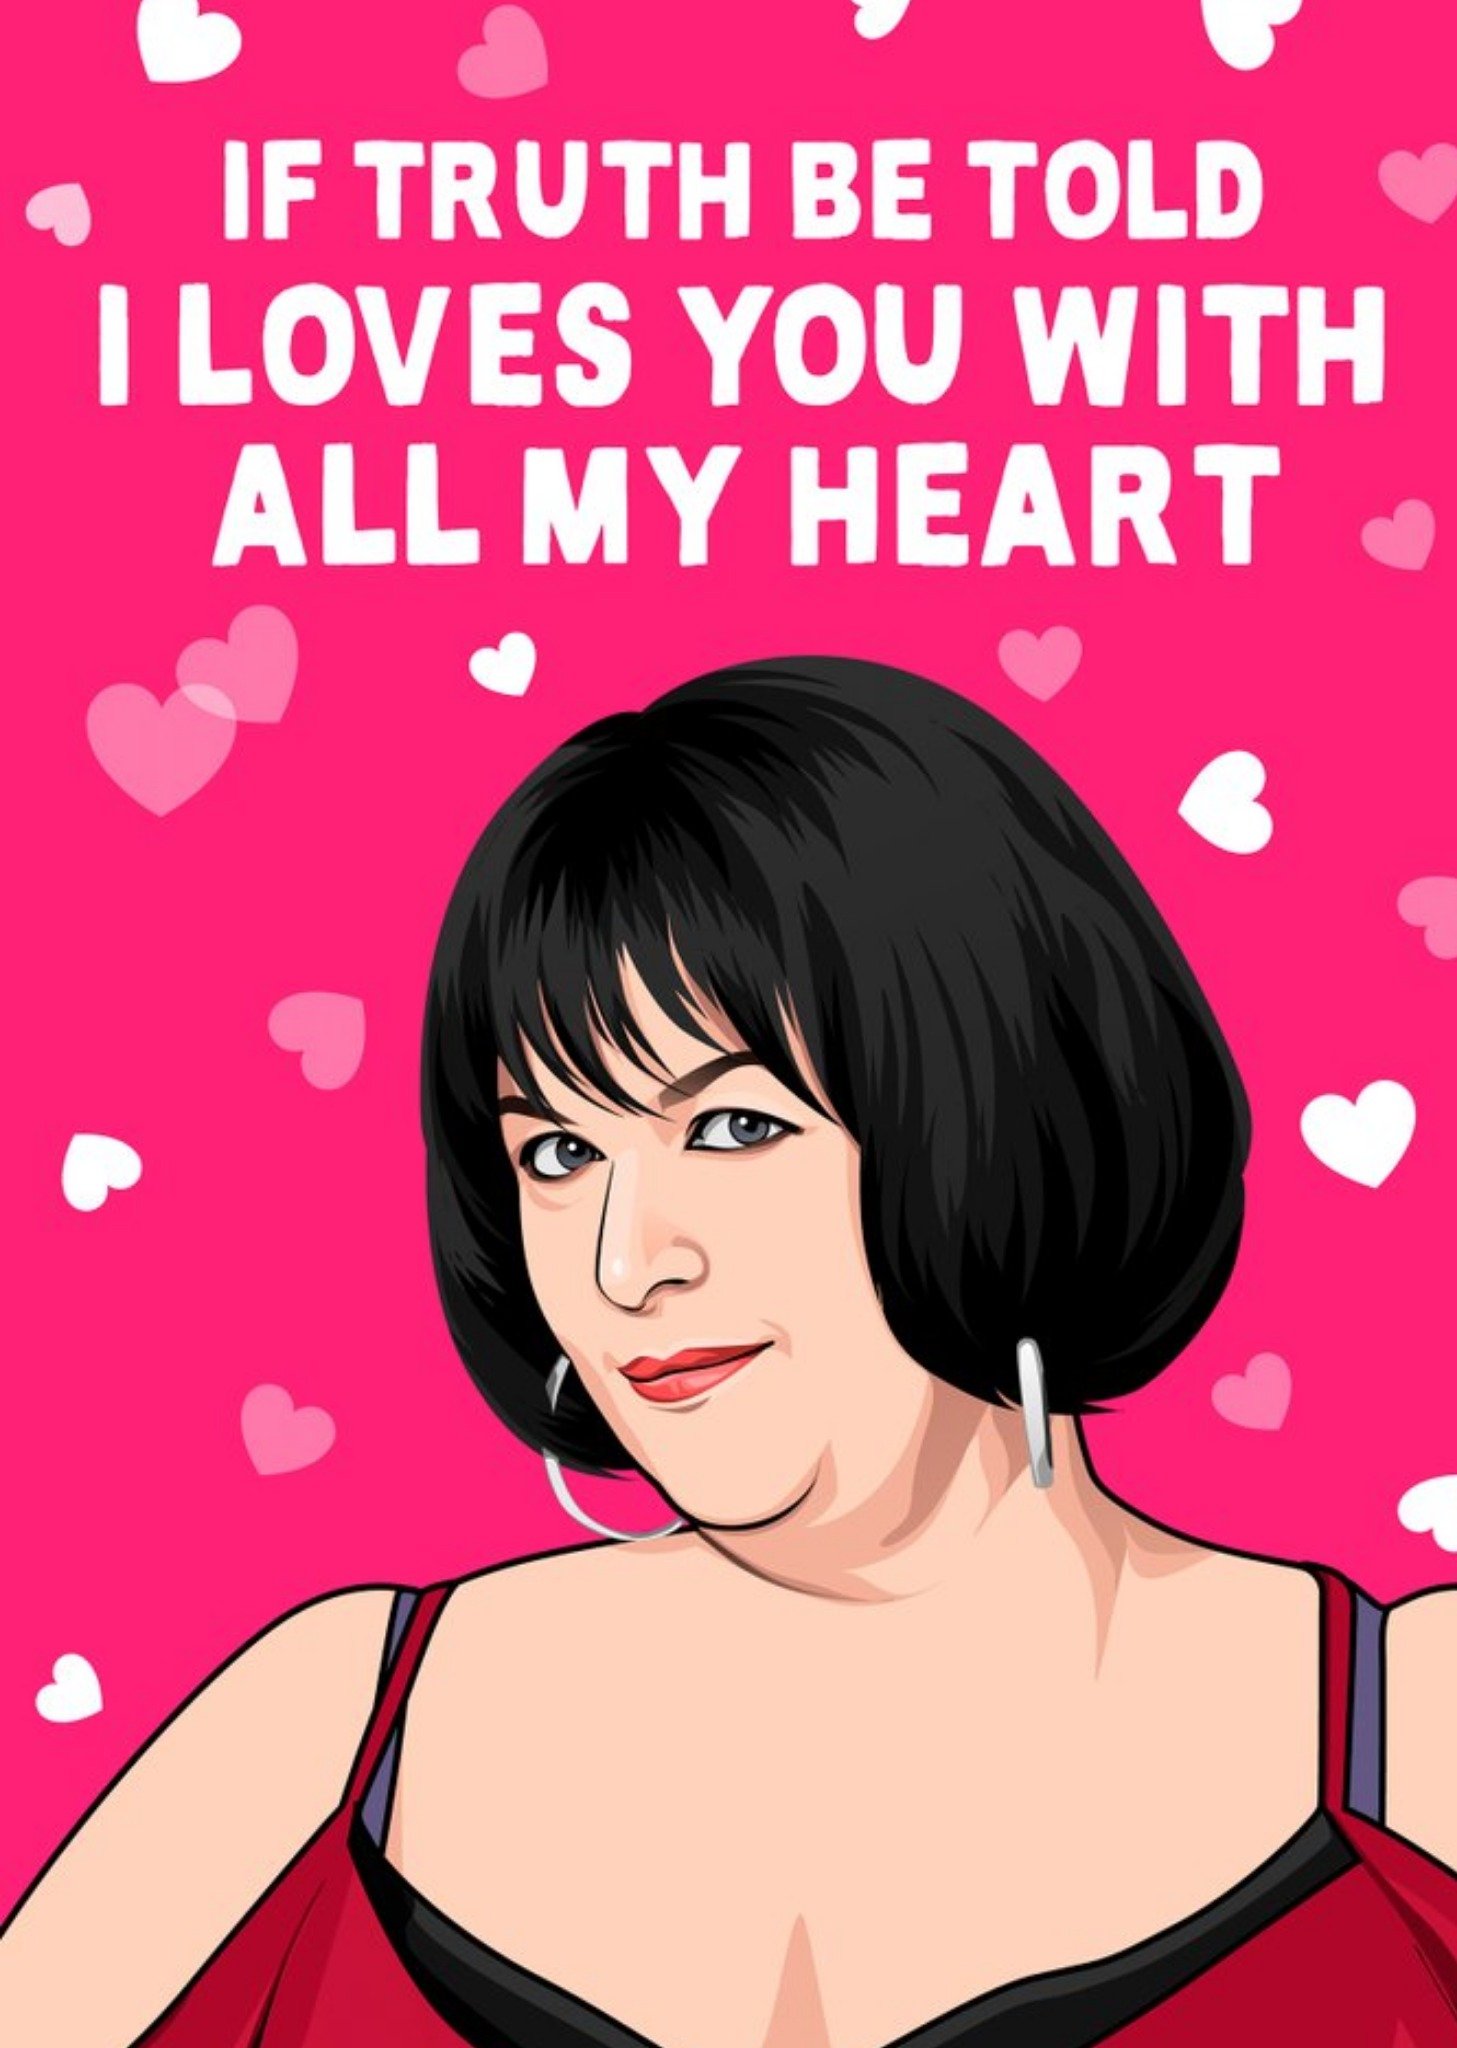 All Things Banter I Loves You With All My Heart Funny Tv Celebrity Card Ecard